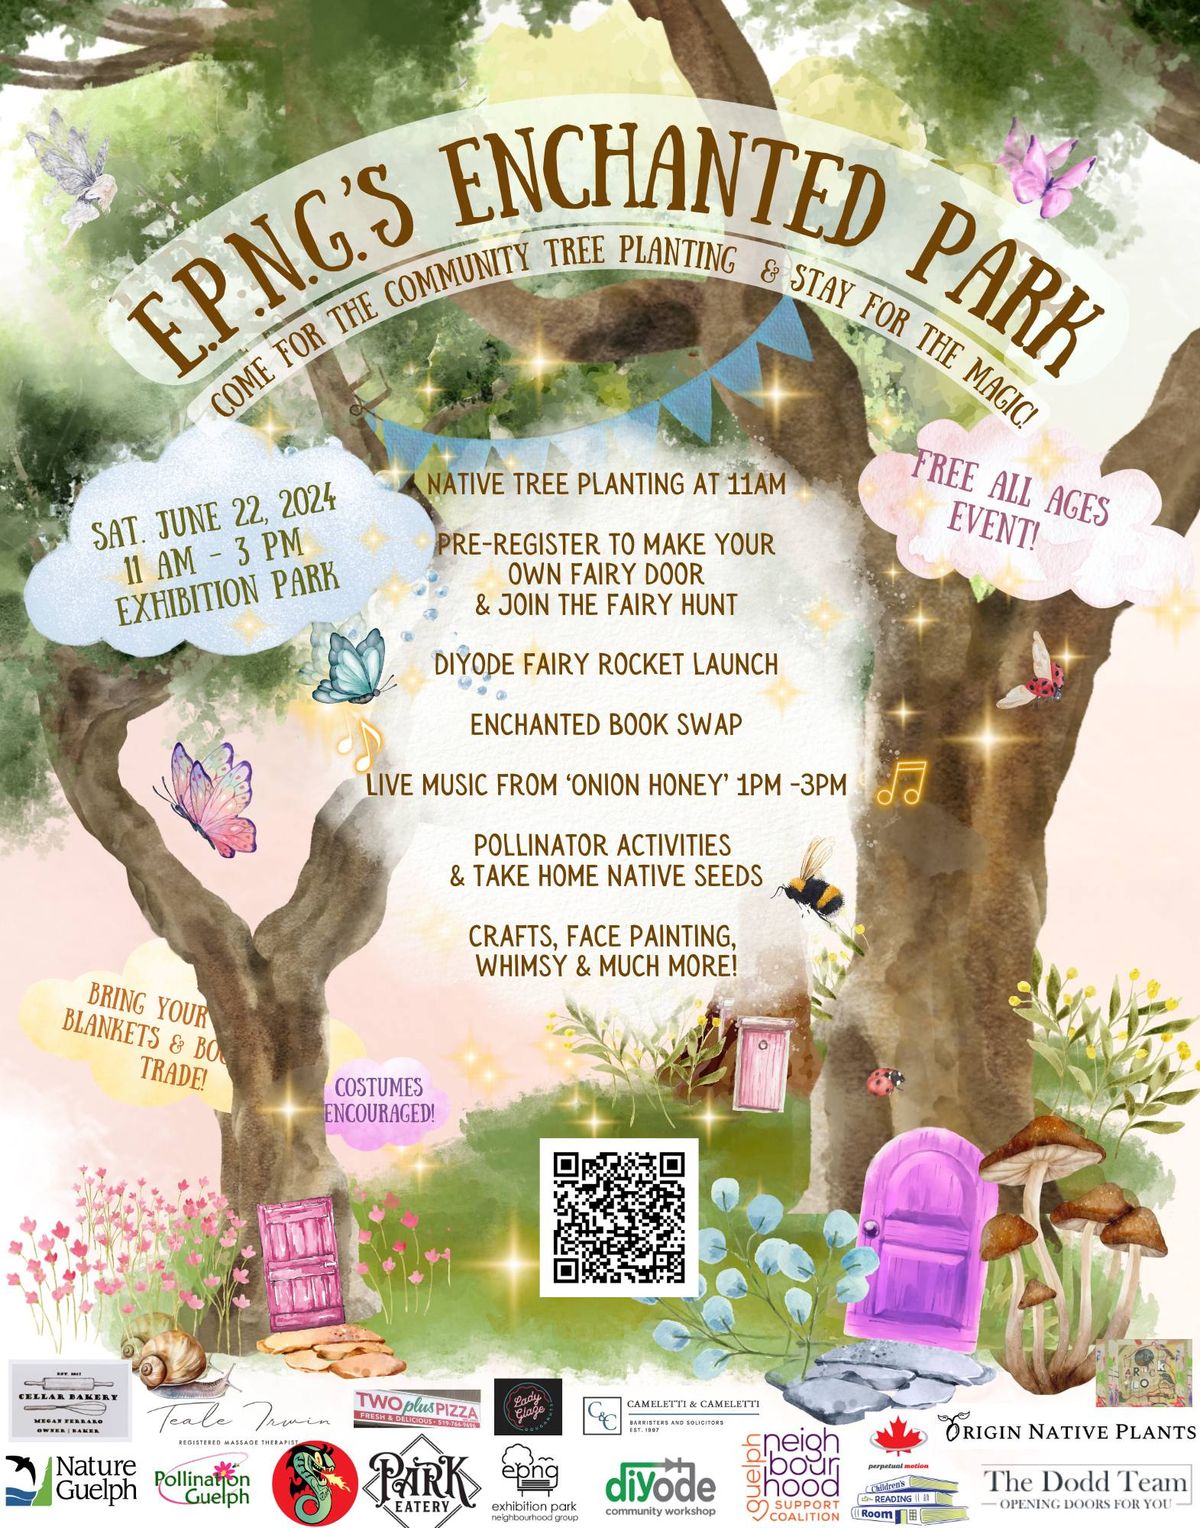 Enchanted Park - Come for the Tree Planting, Stay for the Magic!